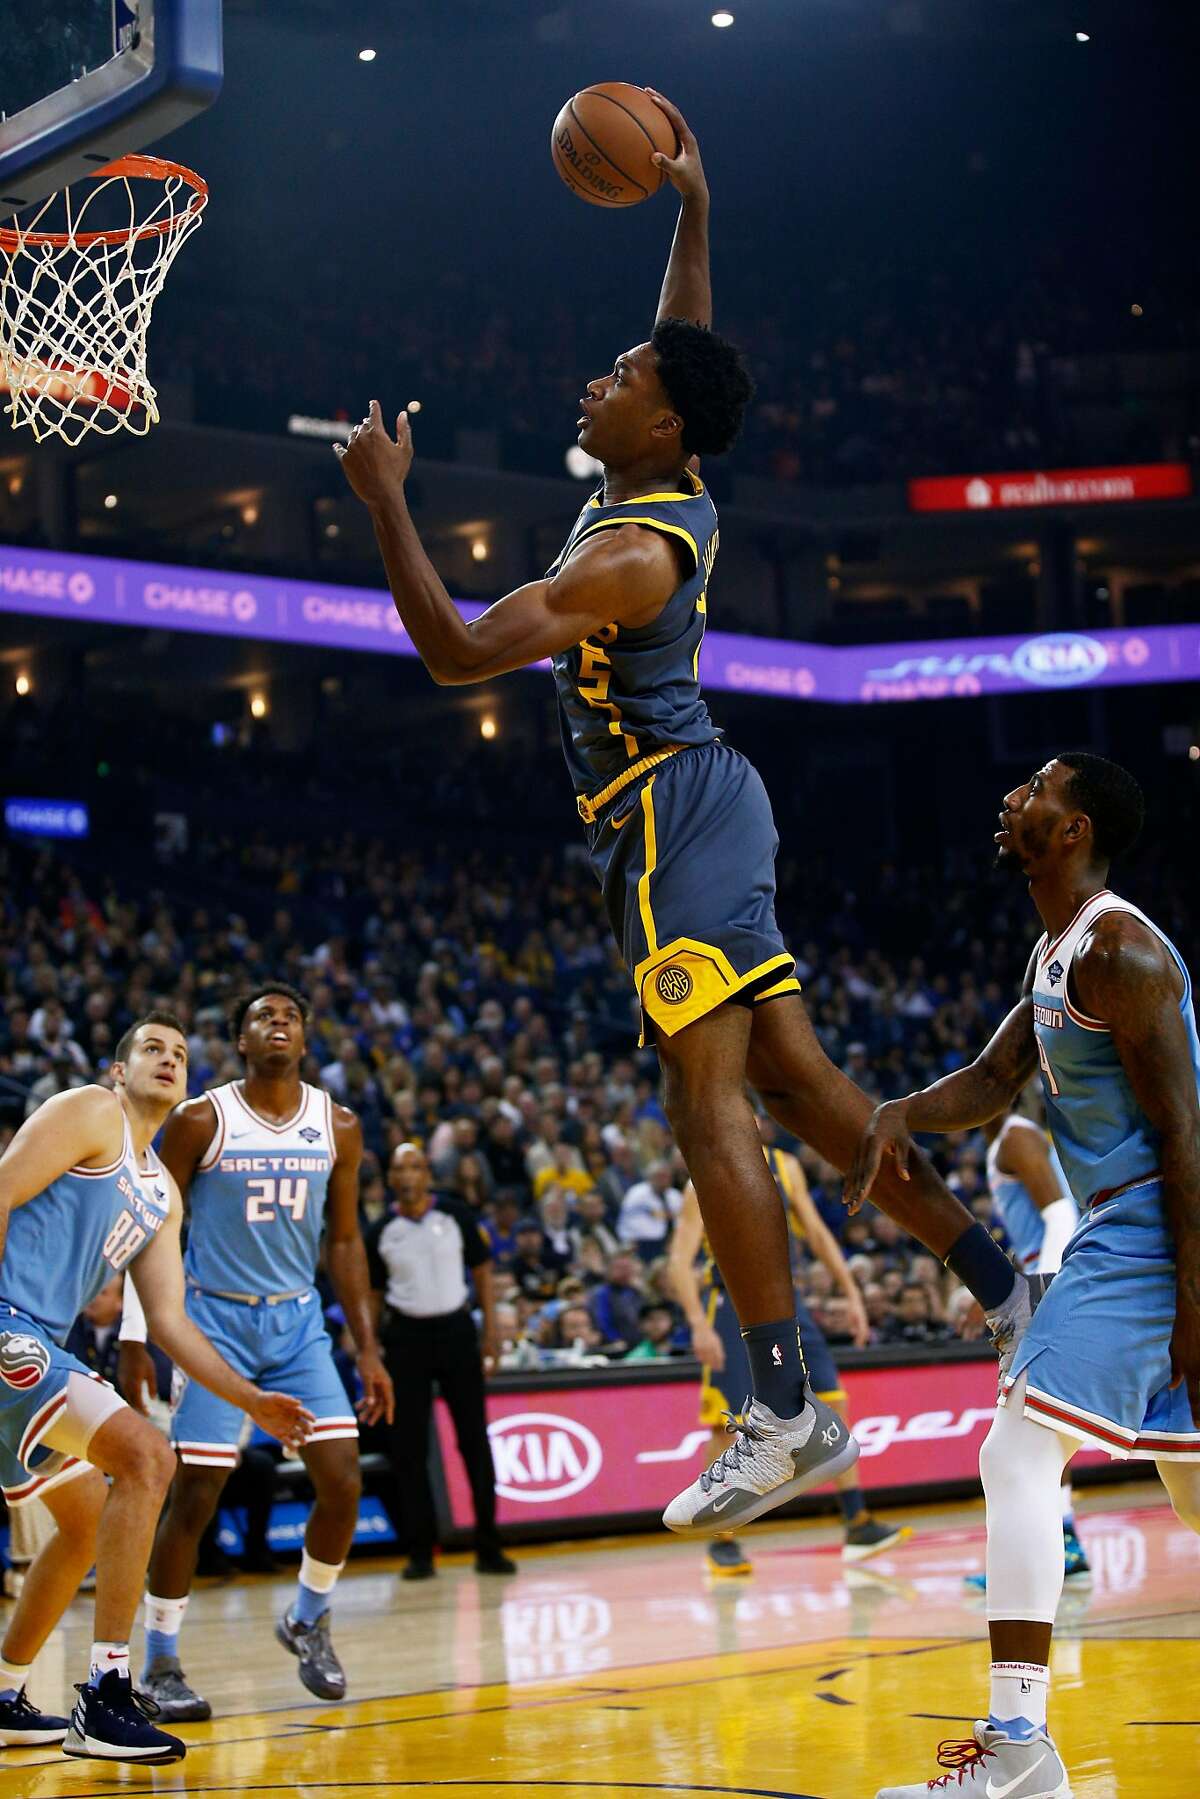 Golden State Warriors center Damian Jones (15) dunks in the first half of an NBA game at Oracle Arena on Saturday, Nov. 24, 2018, in Oakland, Calif.